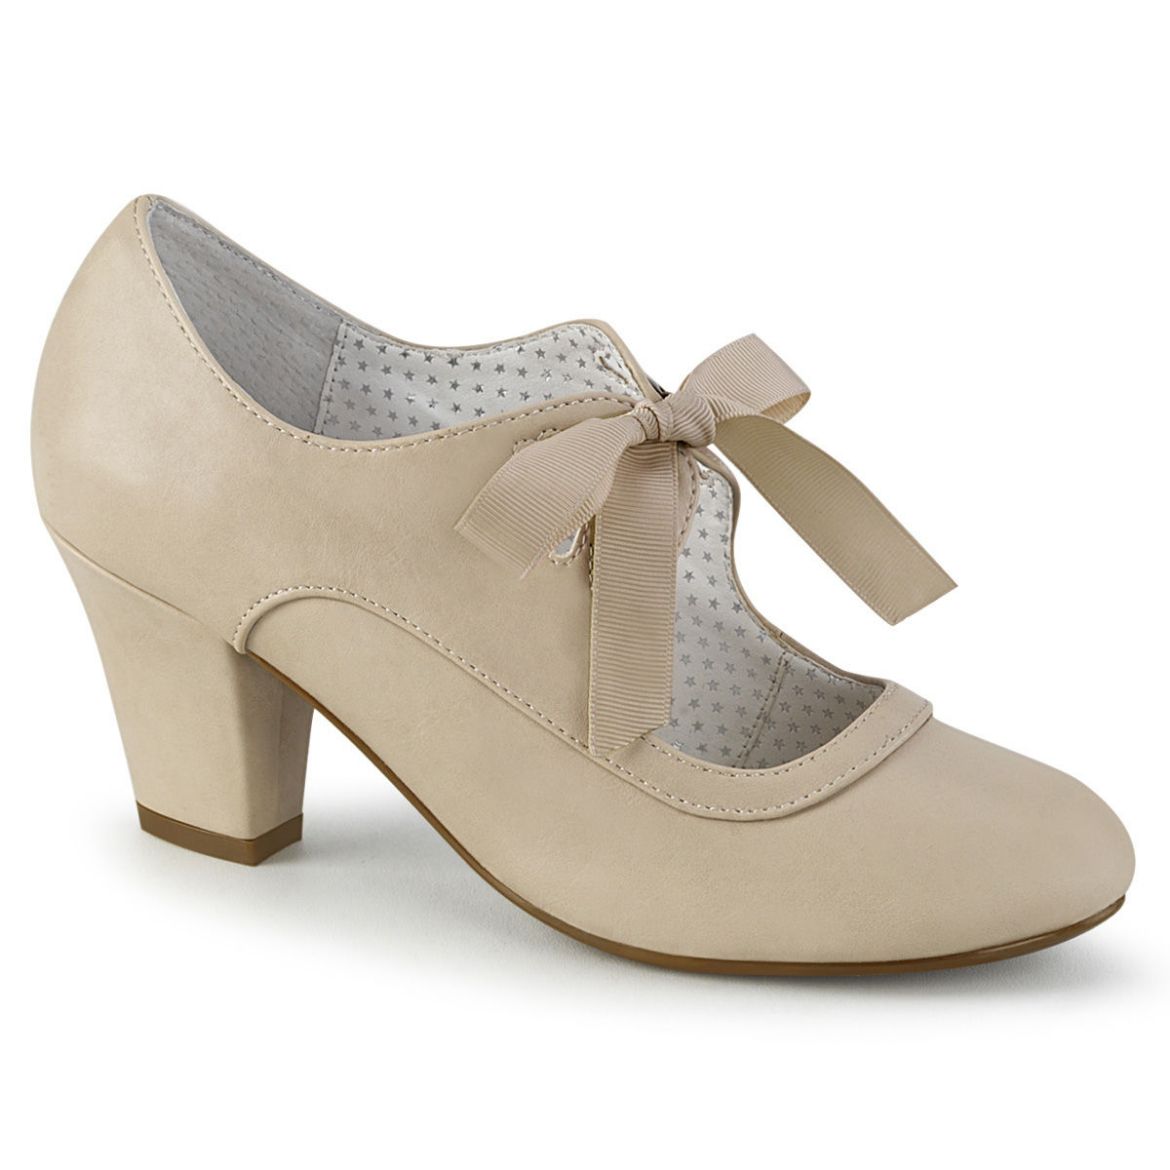 Product image of Pin Up Couture WIGGLE-32 Beige Faux Leather 2 1/2 inch (6.5 cm) Cuben Heel Heel Mary Jane Pump With Ribbon Tie Court Pump Shoes